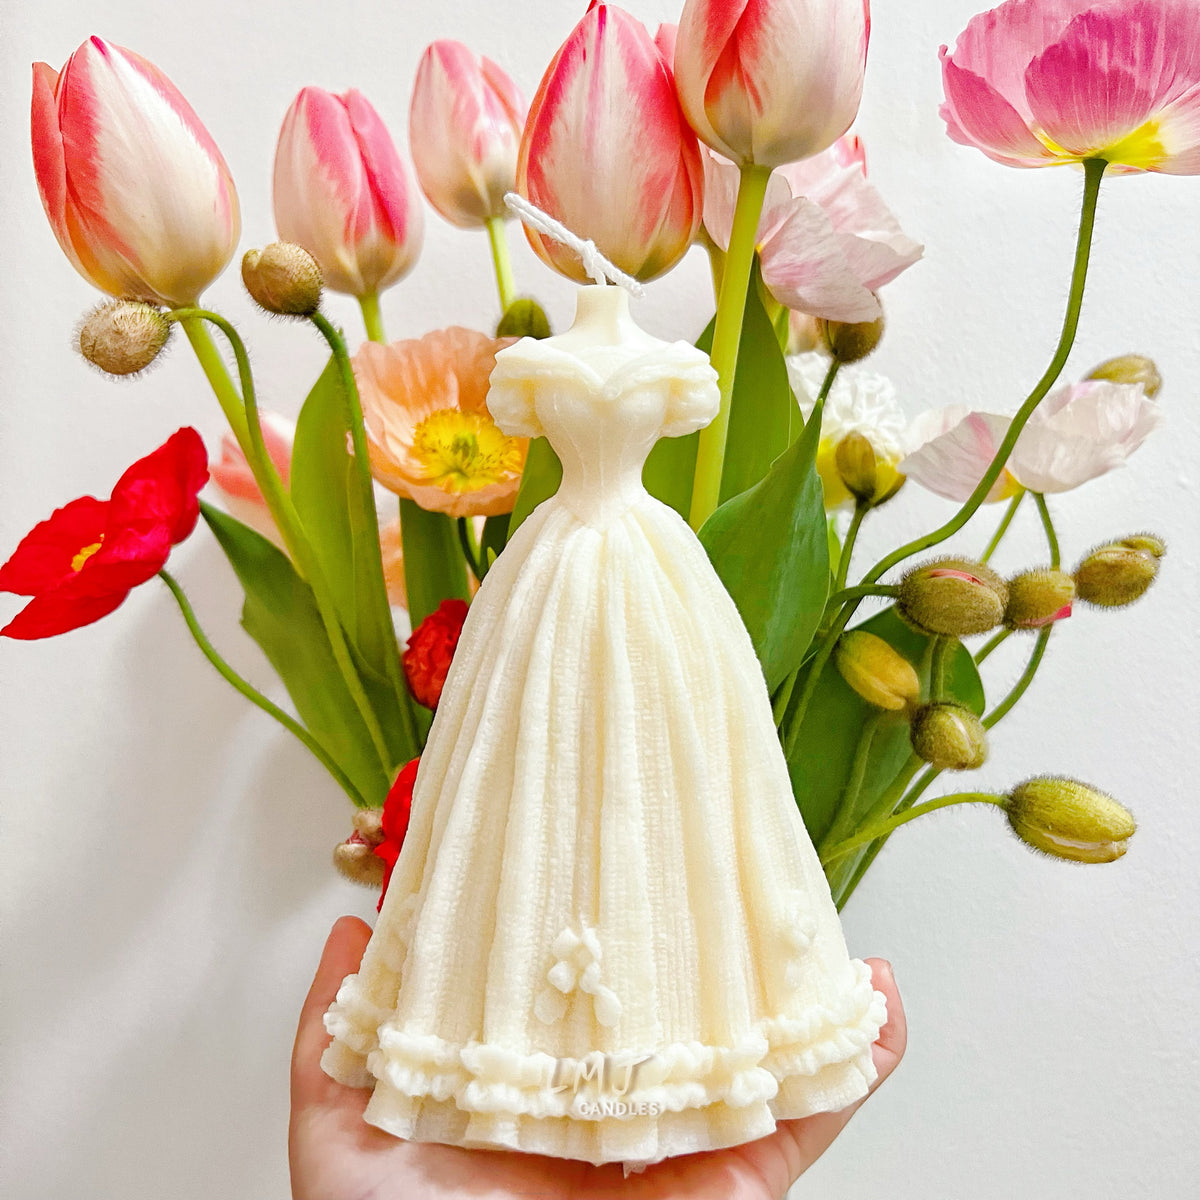 Vintage Wedding Dress Body Candle, Decorative Candle, Handmade Scented Soy Wax Candle Australia | LMJ Candles